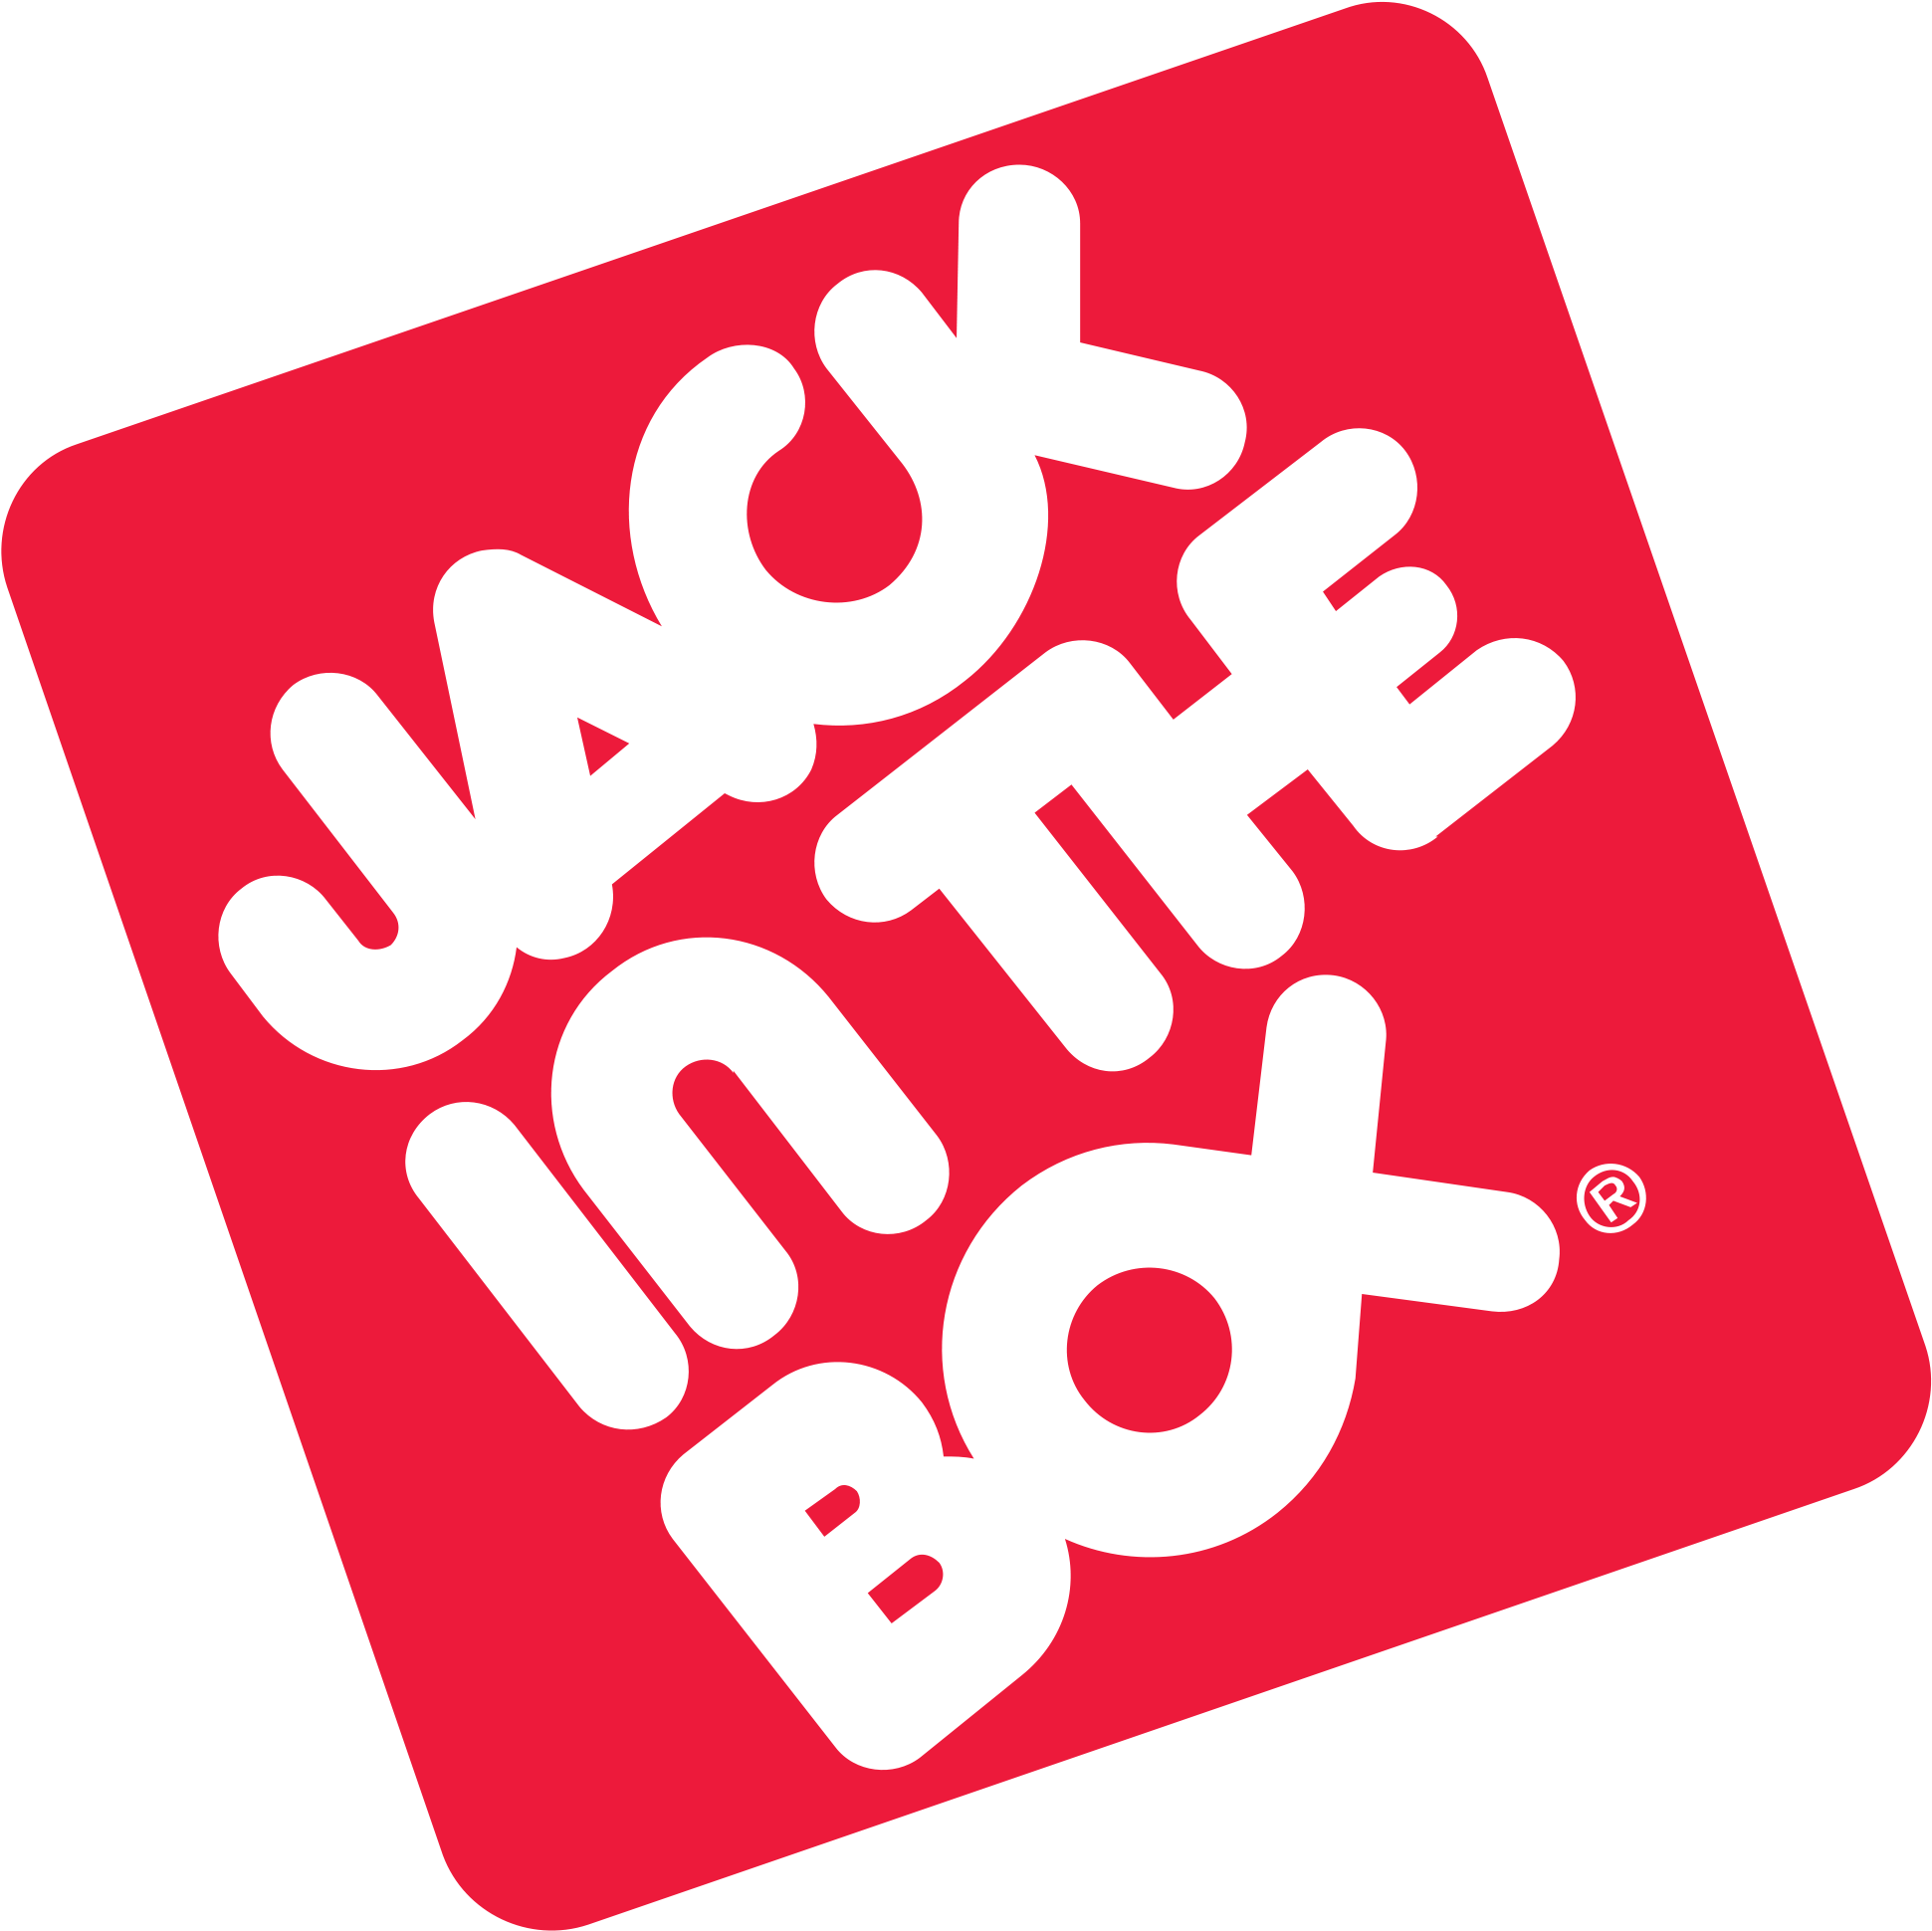 8487485 - Jack In The Box Tacos (2000x2000)